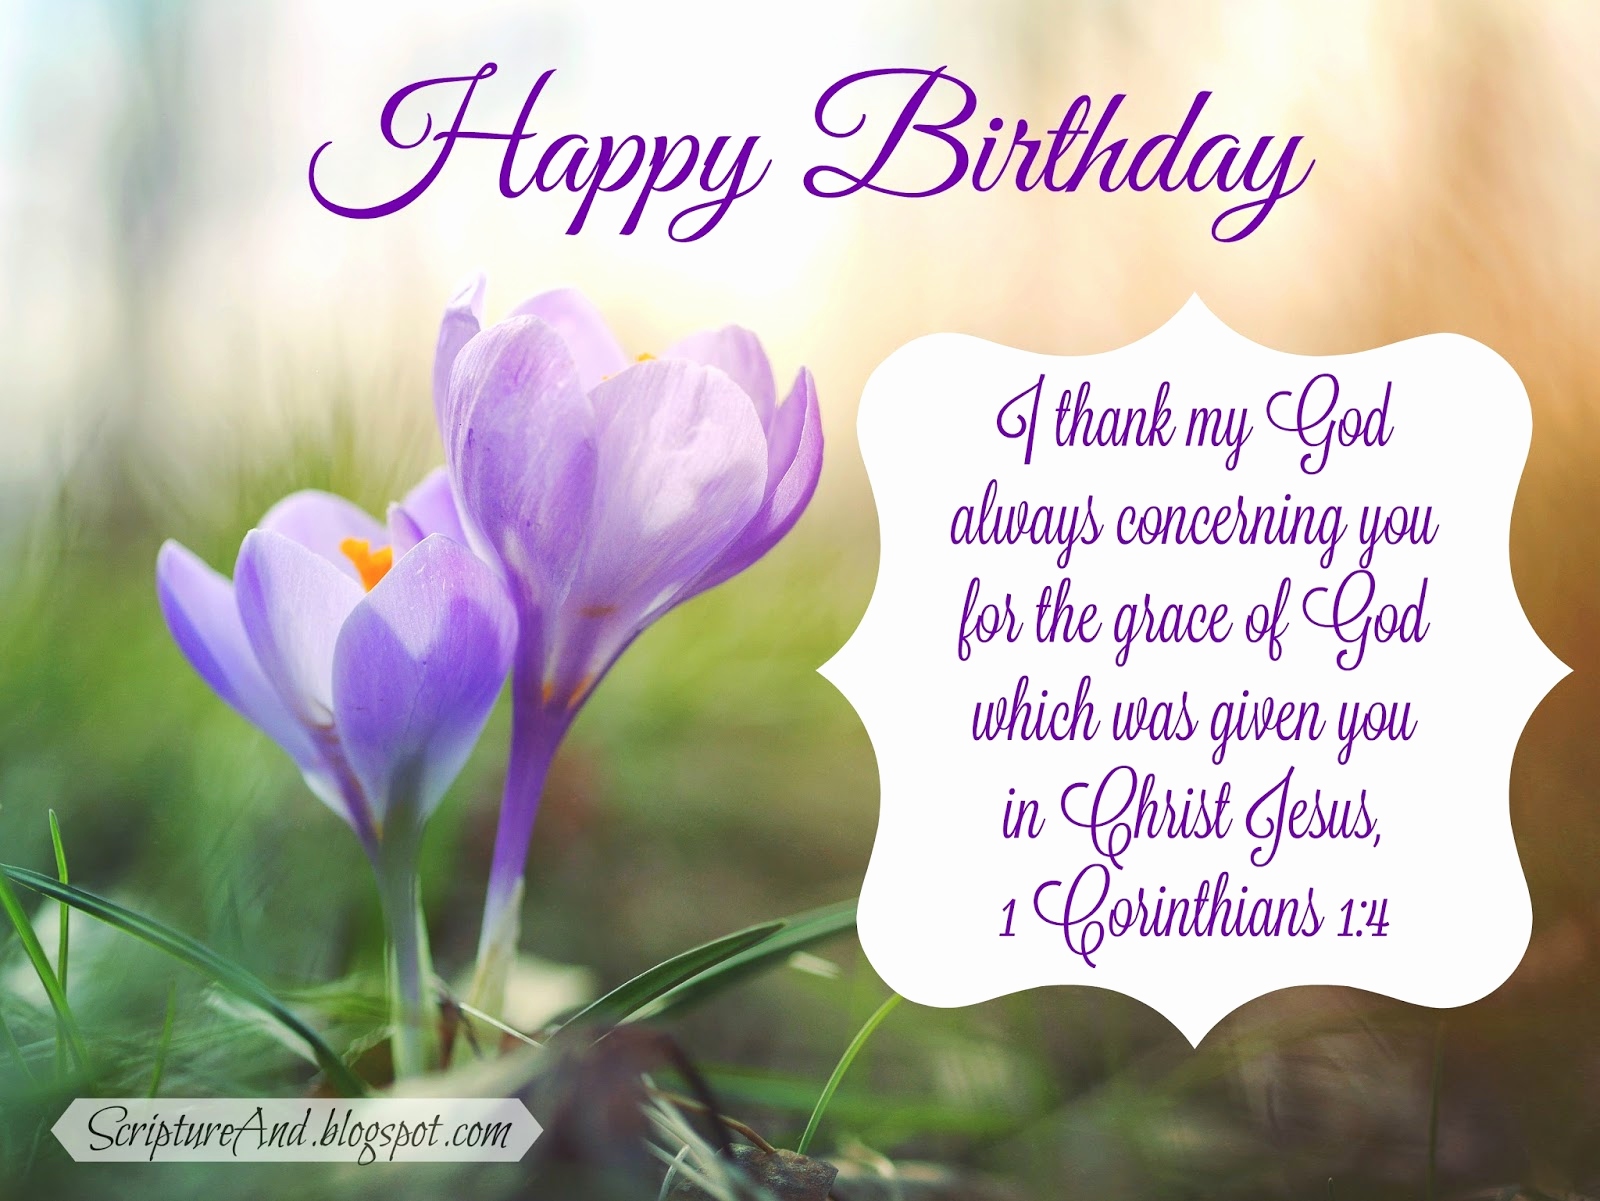 happy-birthday-images-religious-free-beautiful-bday-cards-and